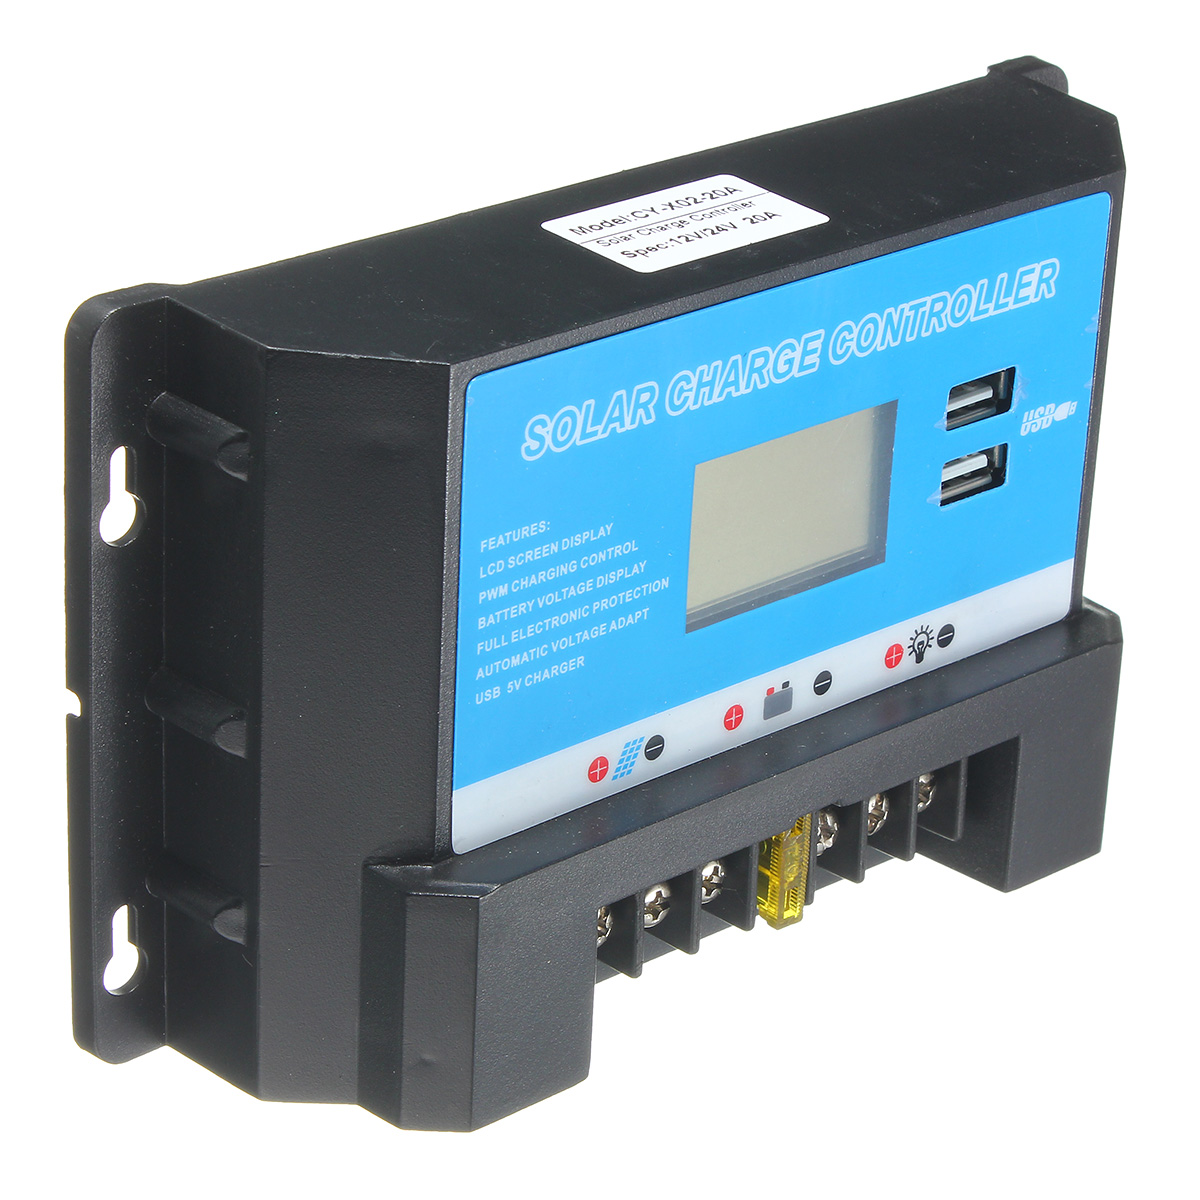 LCD-20A-1224V-Solar-Charge-Controller-Regulator-with-USB-Port-1089471-2